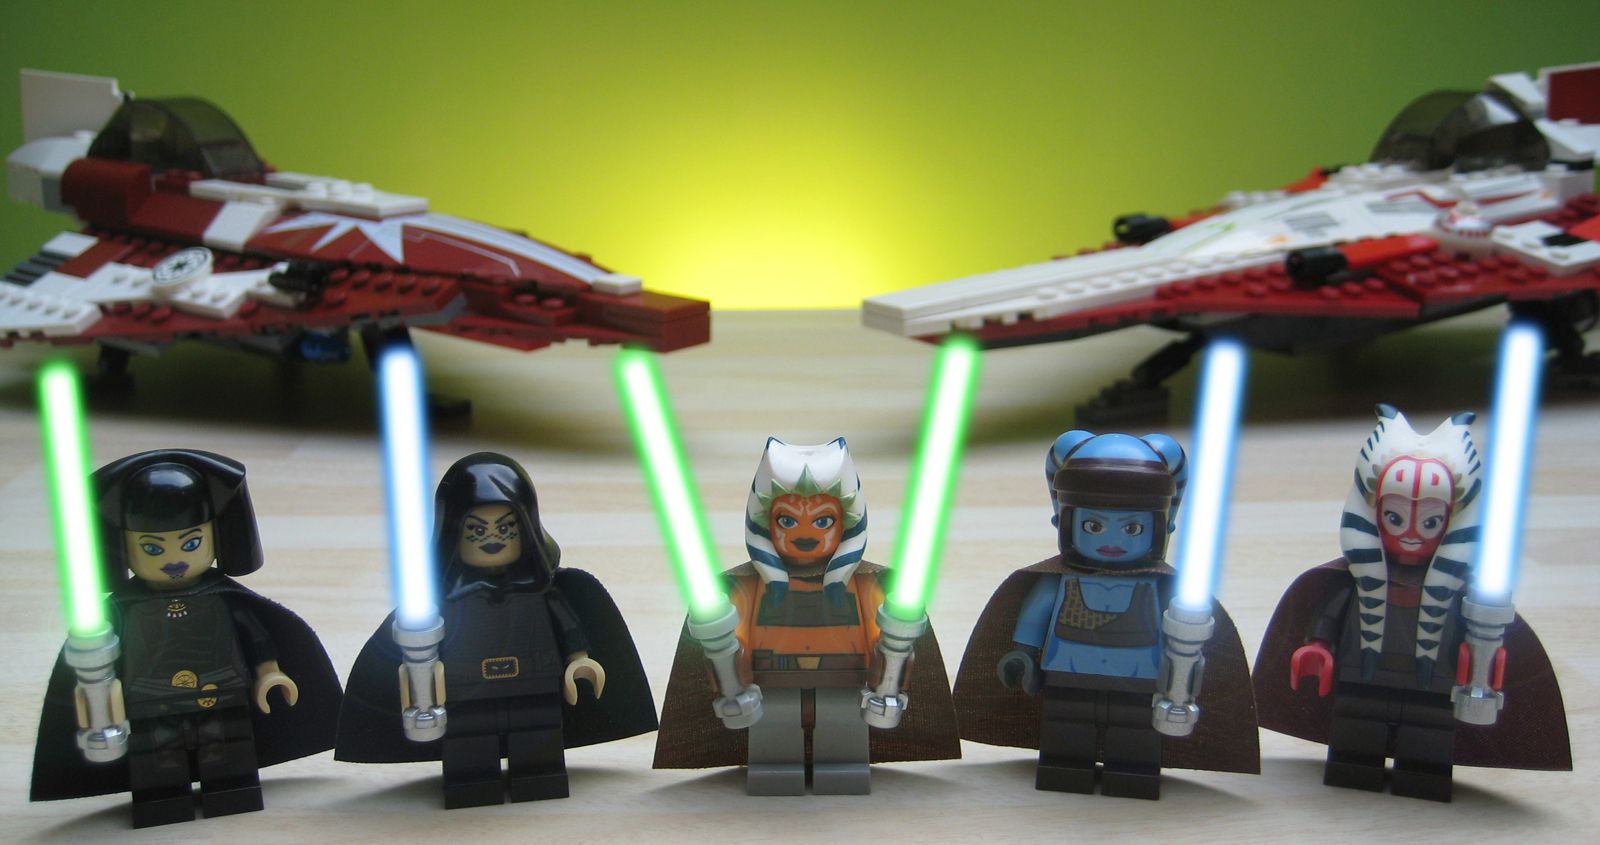 inaugural golden brickies celebrates star wars lego in perfect fan style image 2